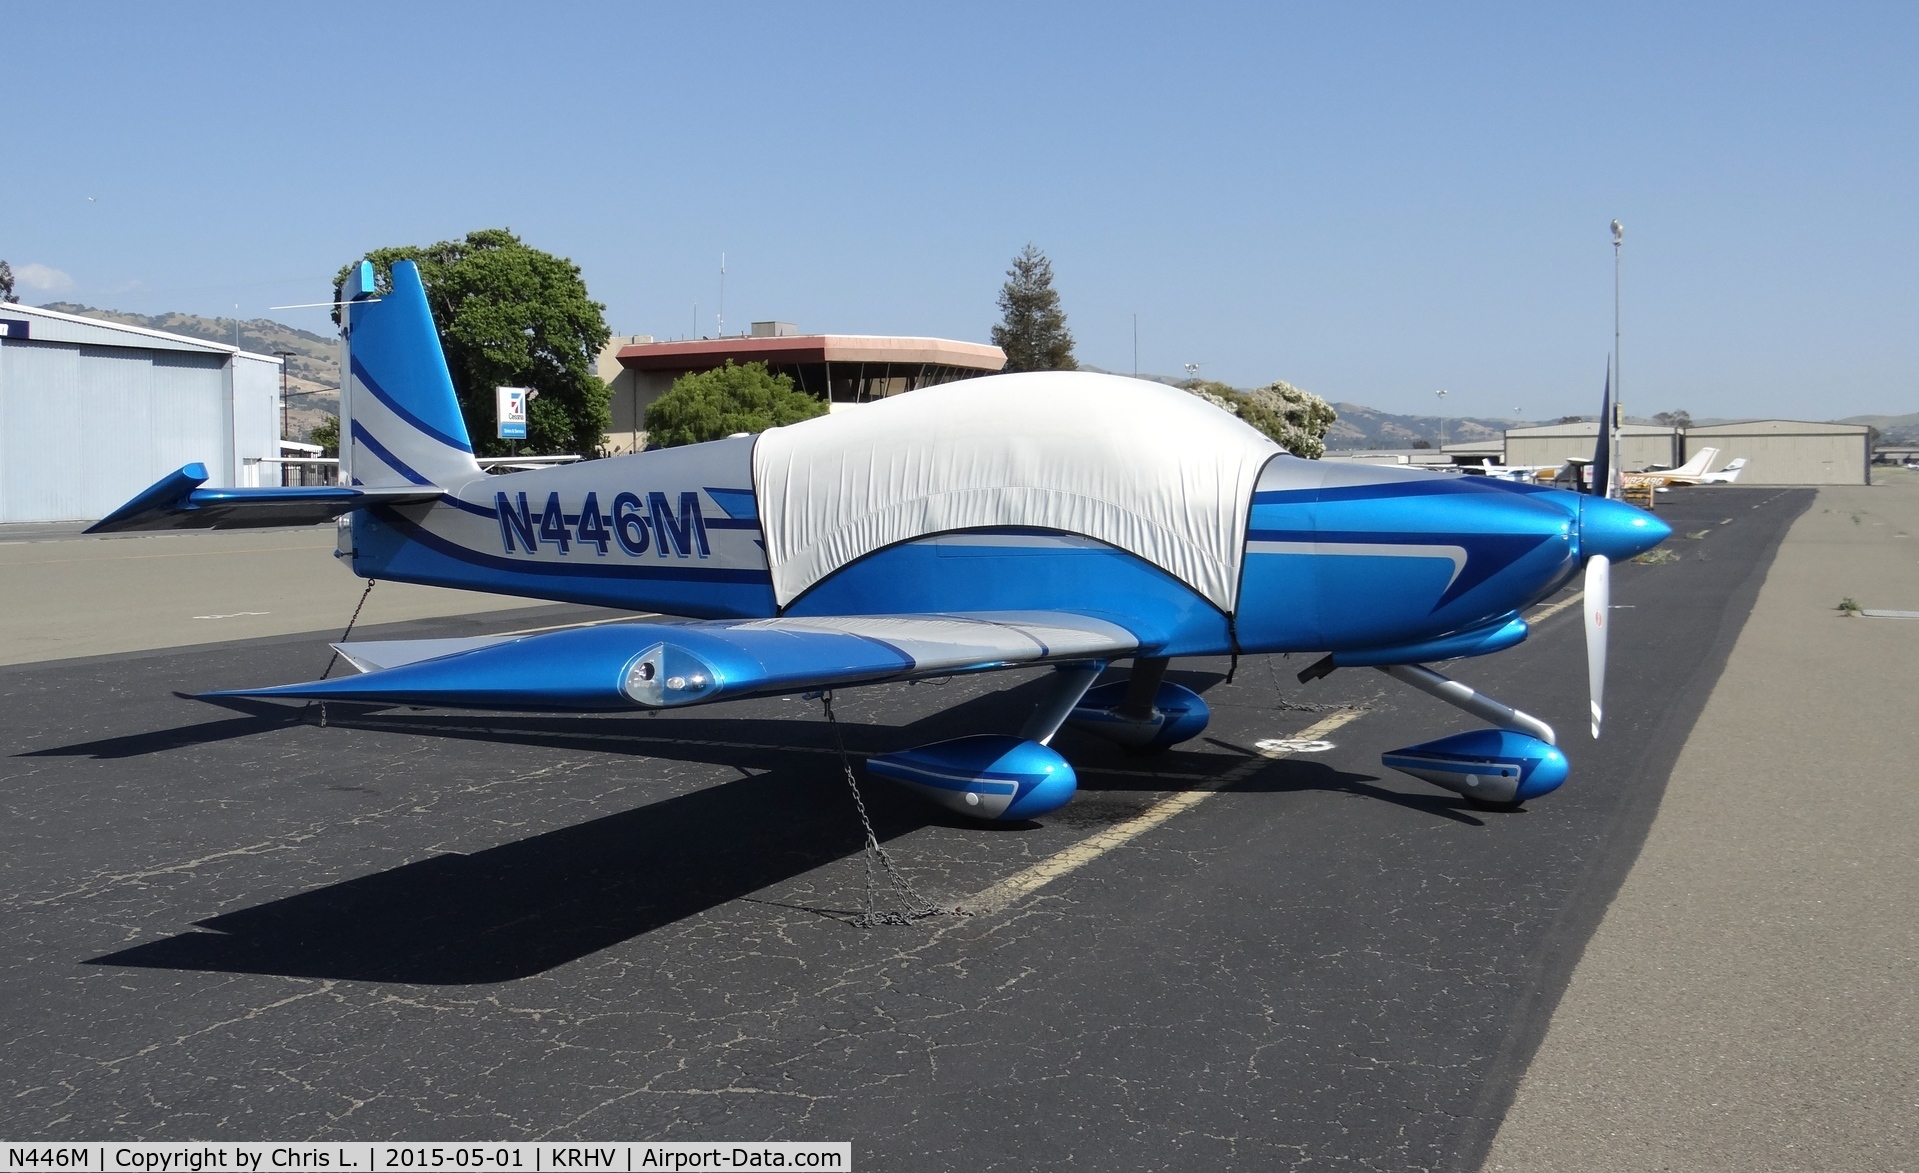 N446M, 2012 Vans RV-10 C/N 40270, A transient 2012 Vans RV-10 sitting on the hot transient ramp at Reid Hillview Airport, CA. It was here a few months ago, and sat on the transient ramp for at least a month.